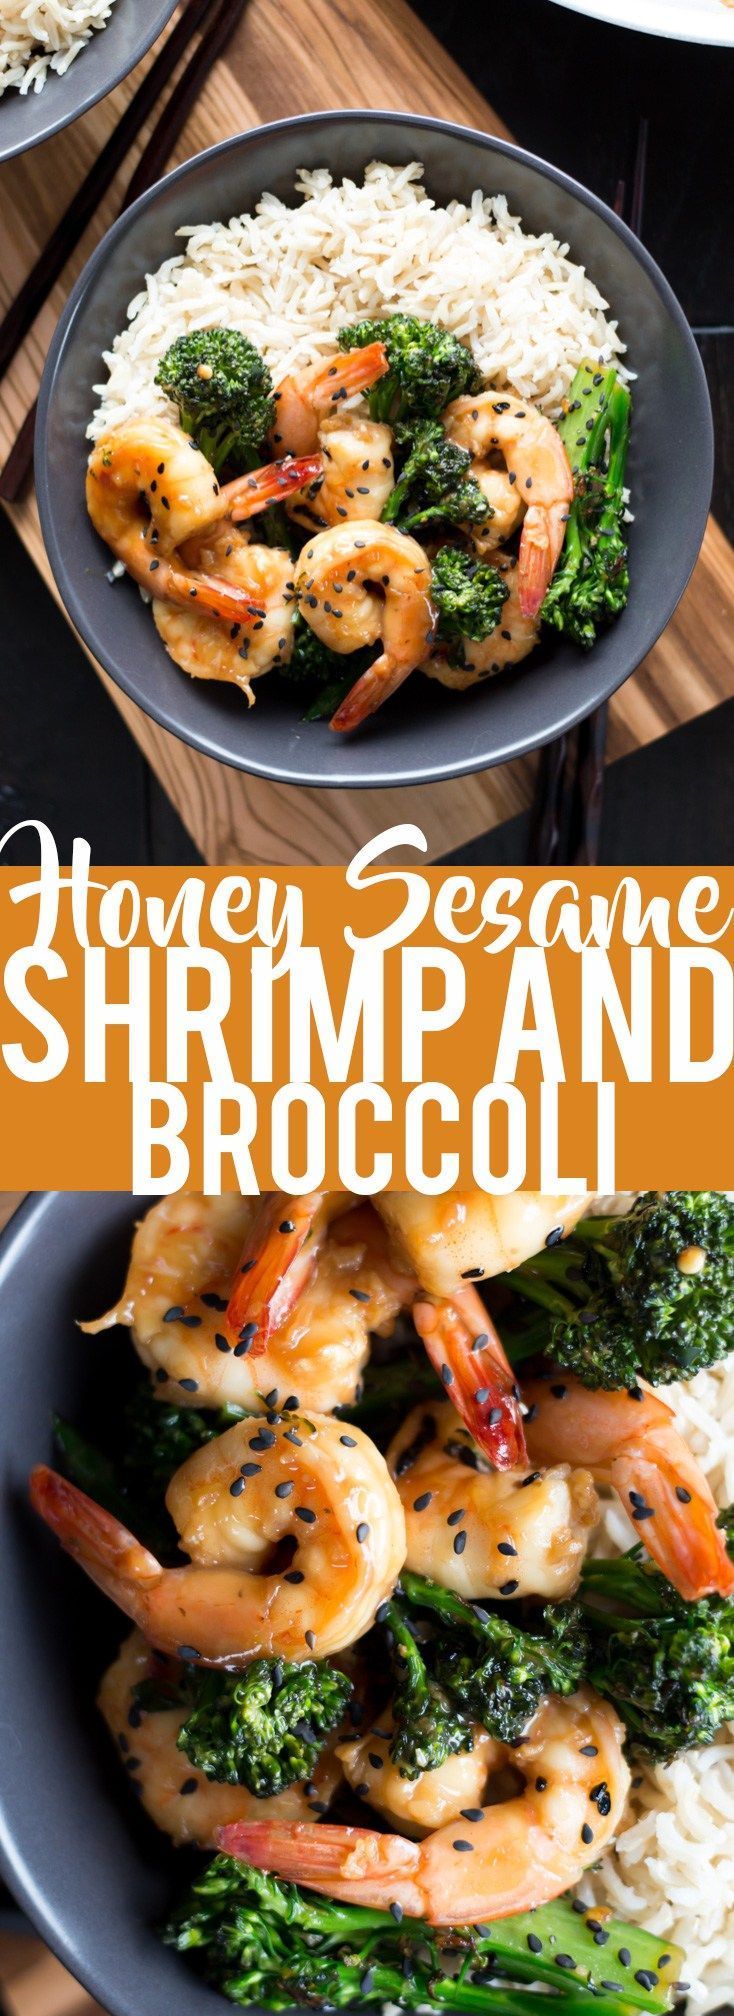 This Honey Sesame Shrimp and Broccoli is a quick and easy dinner. Shrimp and broccoli are quickly sauteed in a sweet and savory